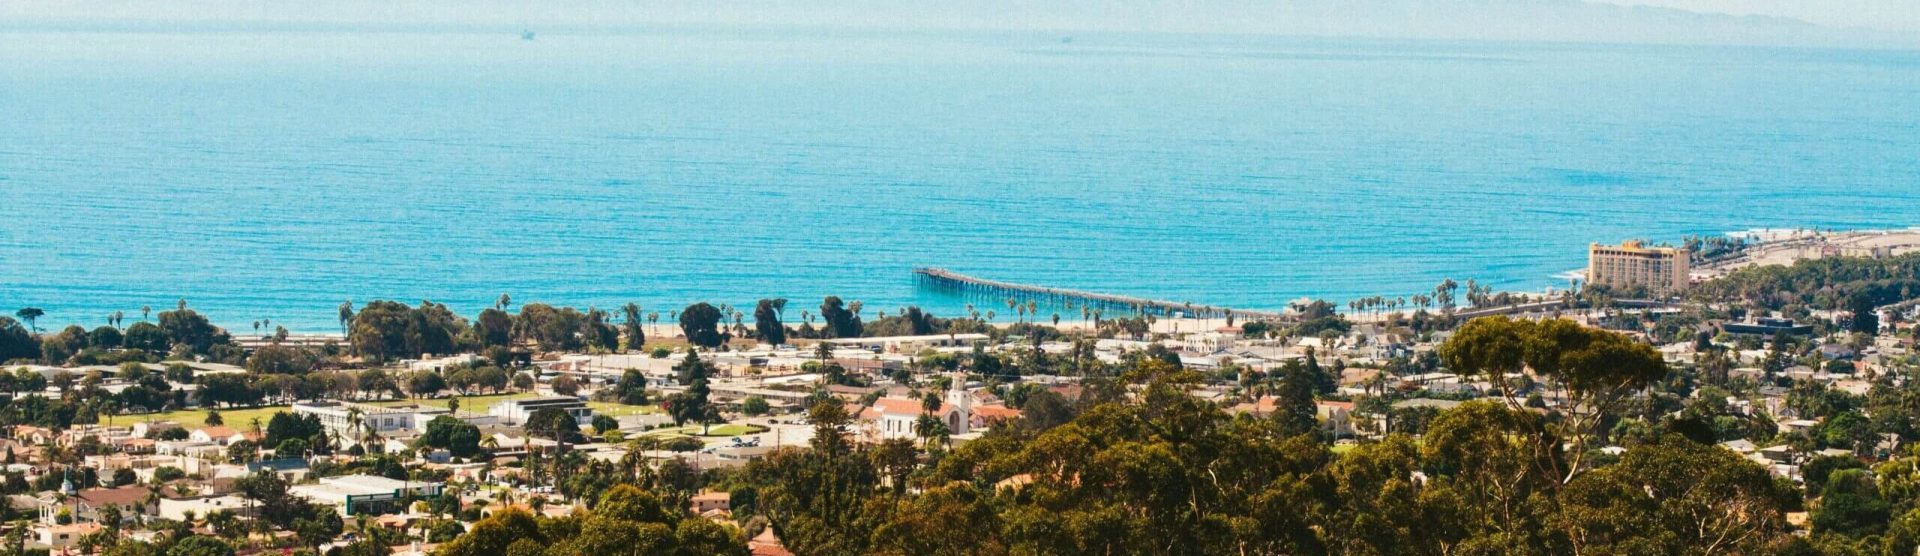 A high view of Ventura beach and the ocean | Asbestos cleaning company in Ventura County